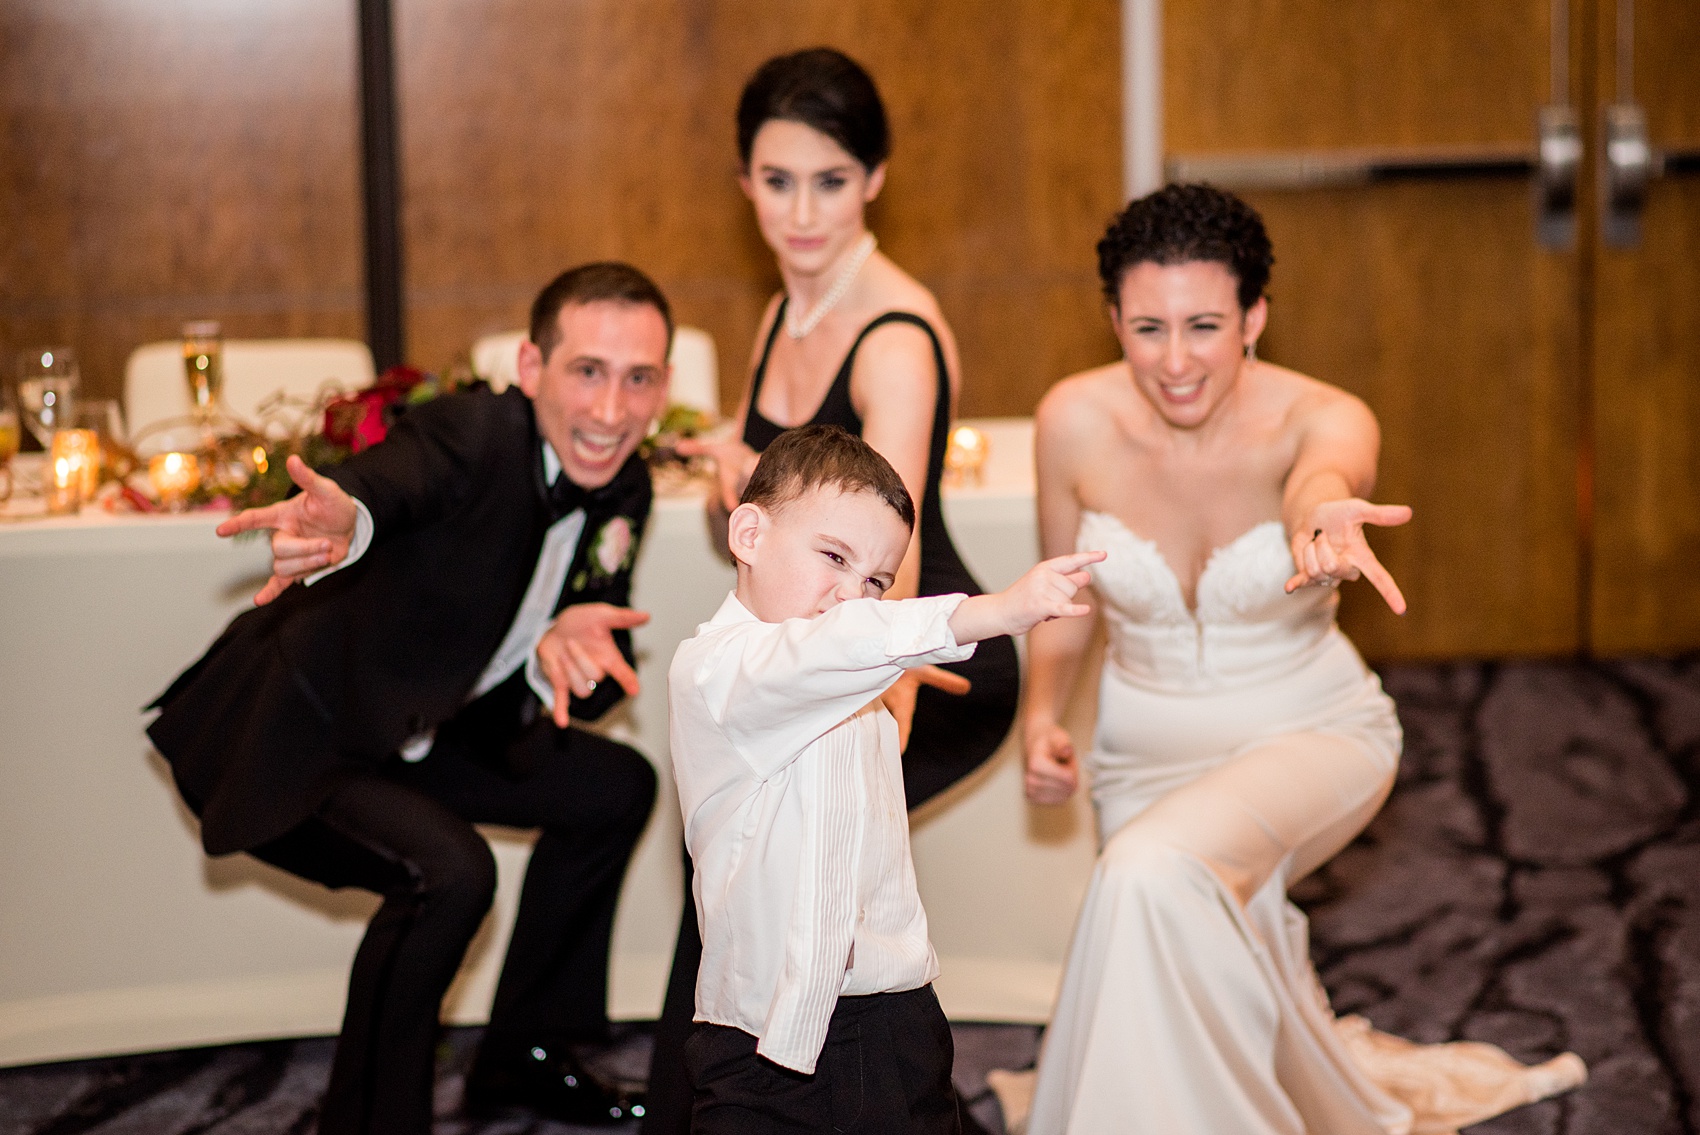 W Hoboken wedding photos at this New Jersey hotel overlooking the Manhattan skyline. Photos by Mikkel Paige Photography of the ring bearer doing Spiderman with his aunts and uncle at the reception. #mikkelpaige #HobokenWedding #NewJerseyPhotographer #NewYorkCityPhotographer #NYCweddingphotographer #brideandgroomphotos #redpeonies #romanticwedding #springwedding #CityWedding